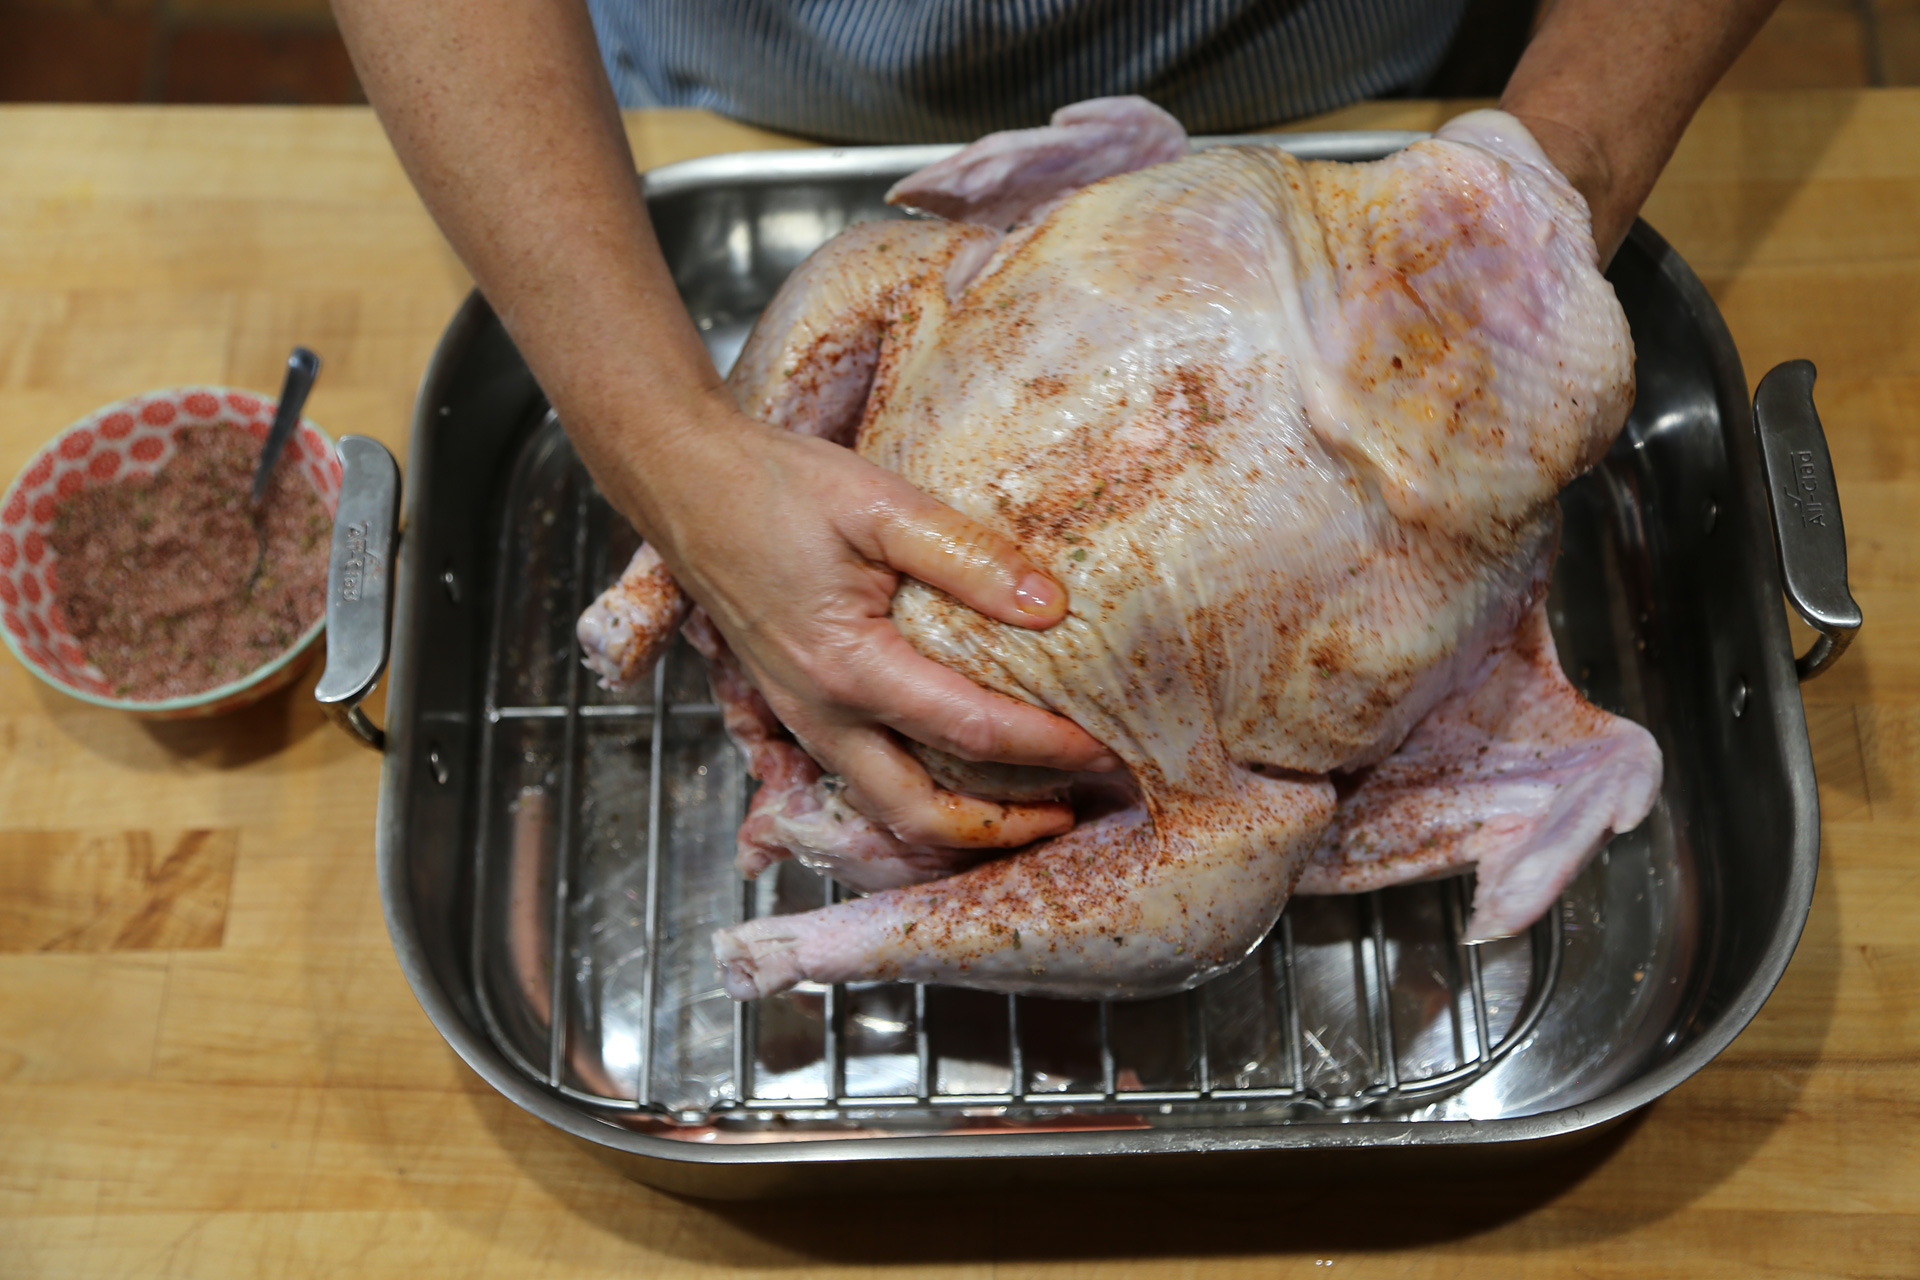 In a bowl, mix together the salt, chile powder, and oregano. Rub the salt mixture all over the turkey, under and over the skin and in the cavities.